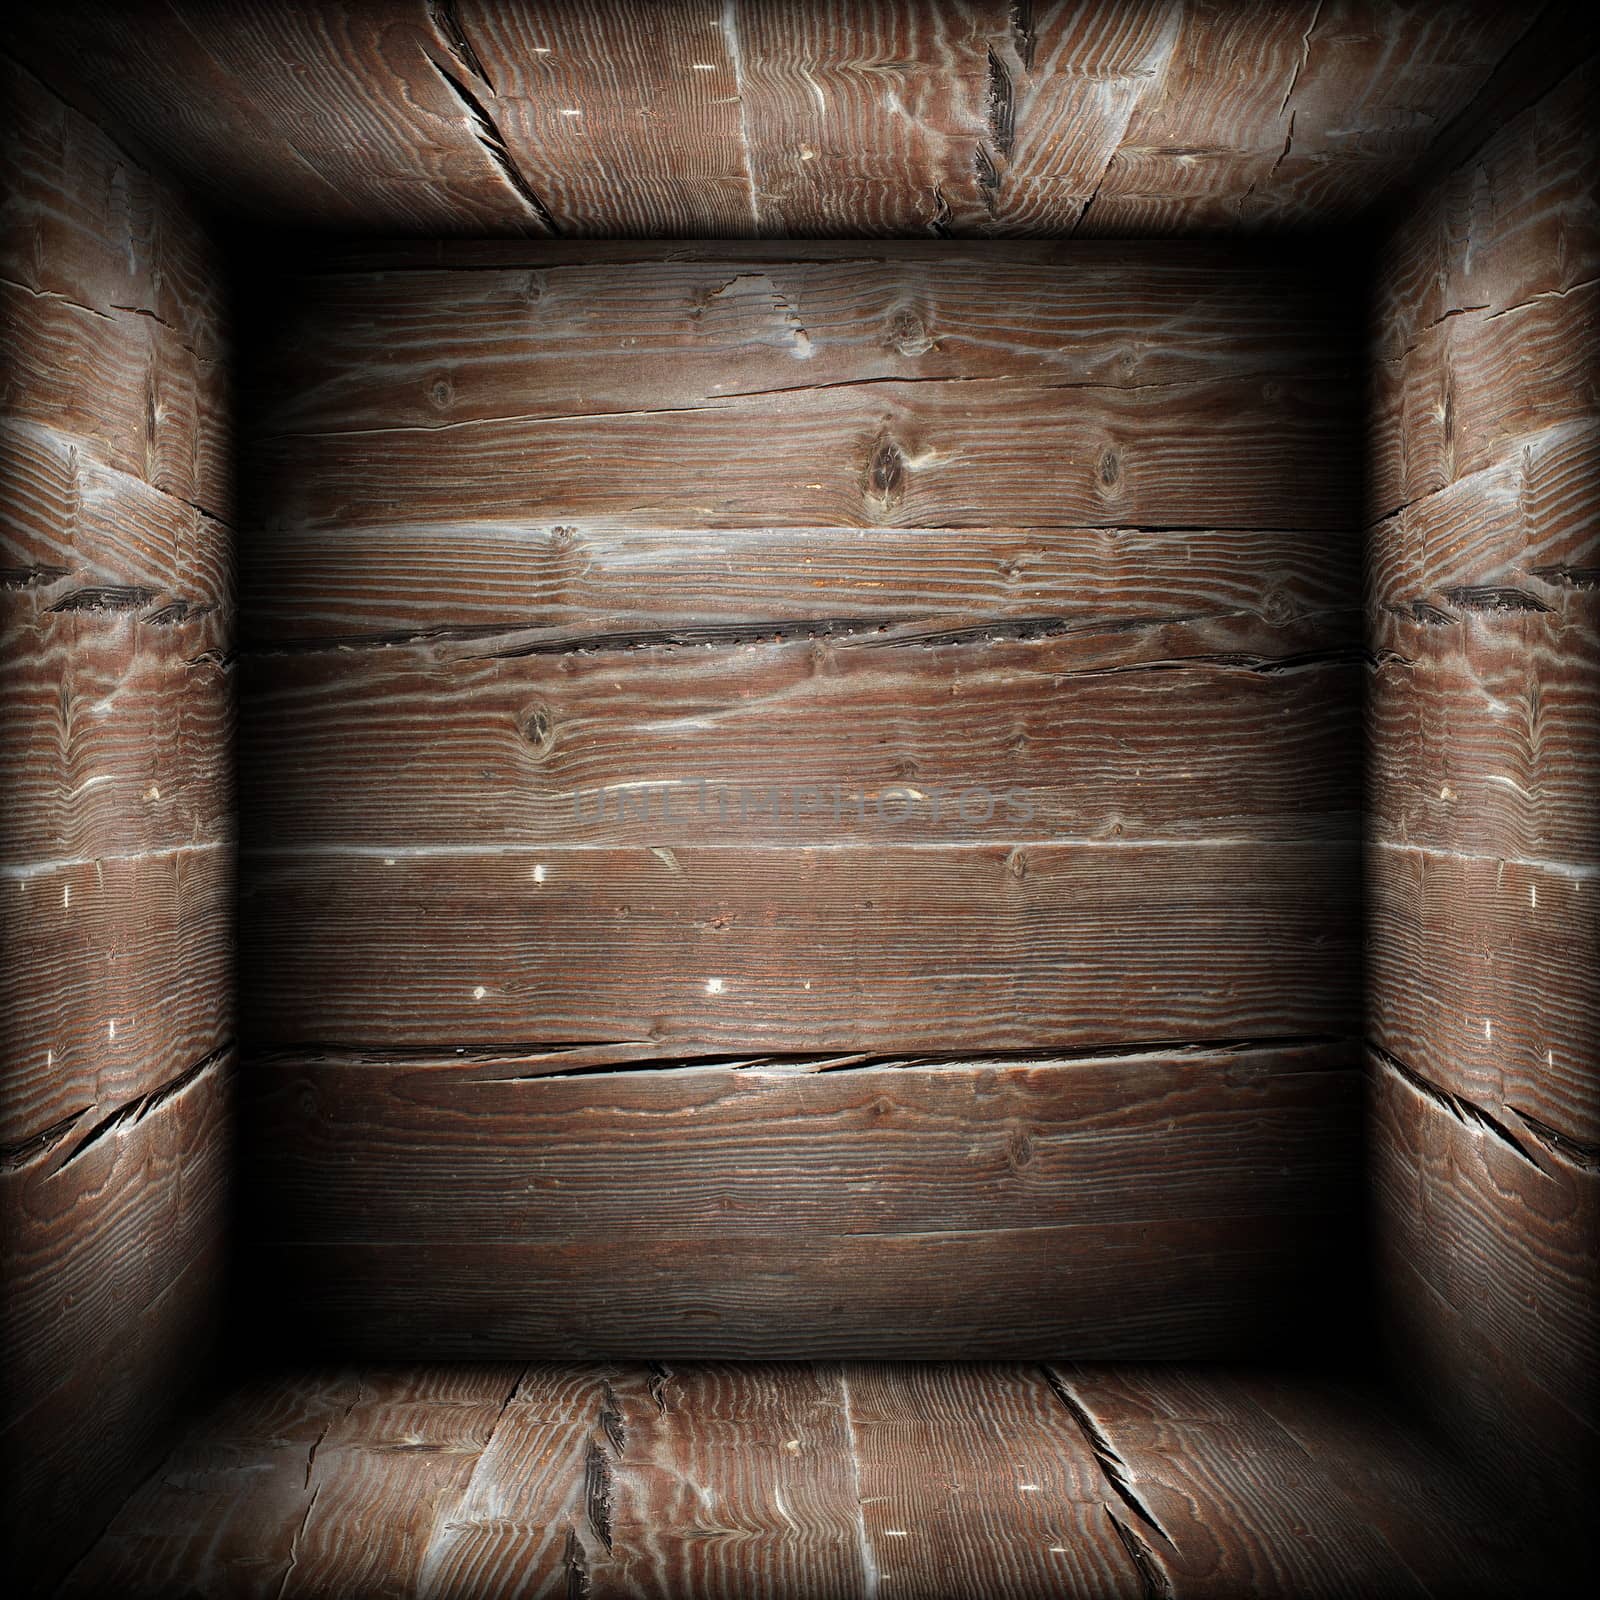 abstact view of wooden box interior, illustration made from wooden texture 